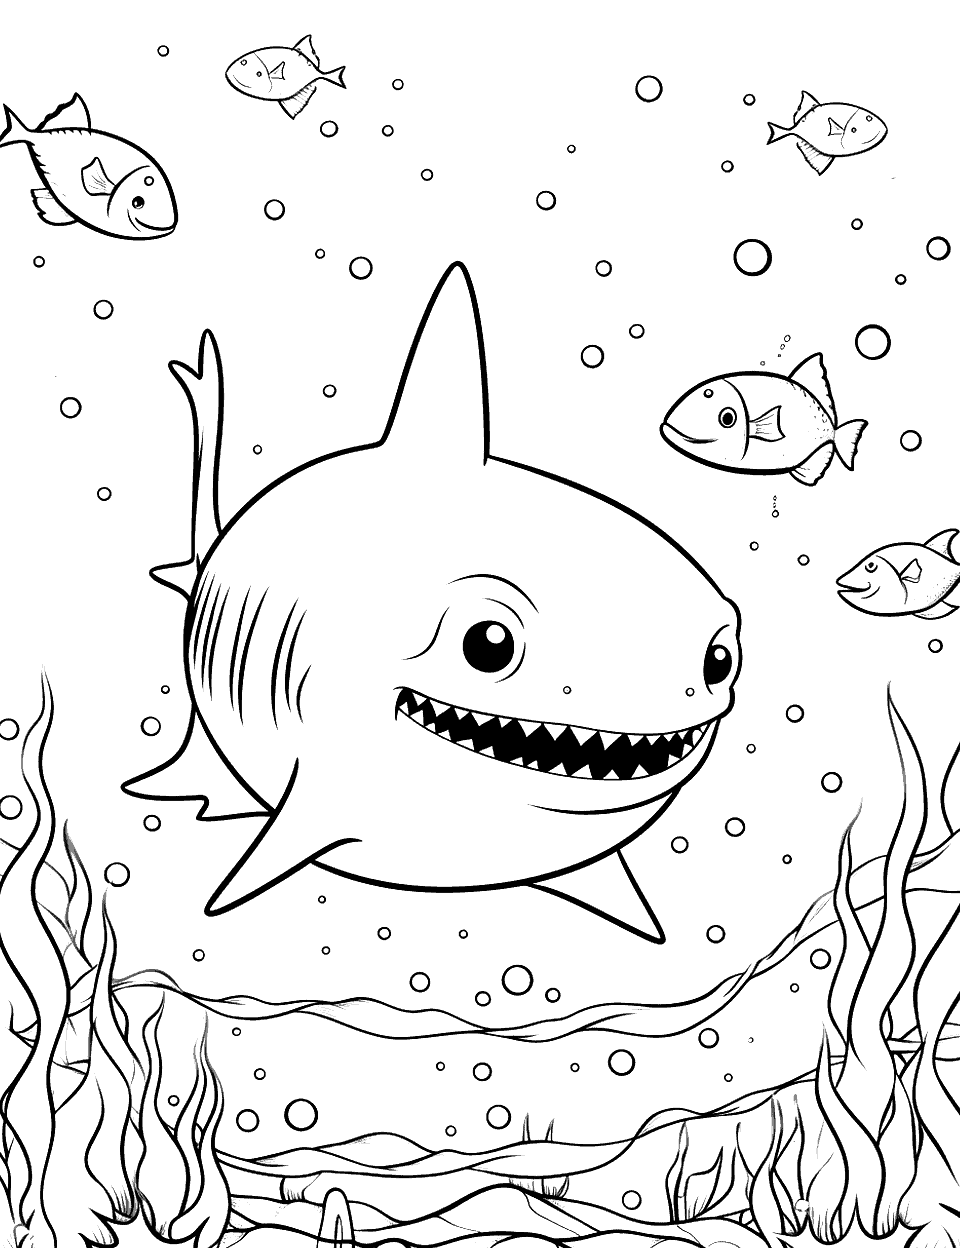 Baby Shark With Bubbles Coloring Page - Baby Shark swimming near the seafloor with lots of bubbles floating to the surface.